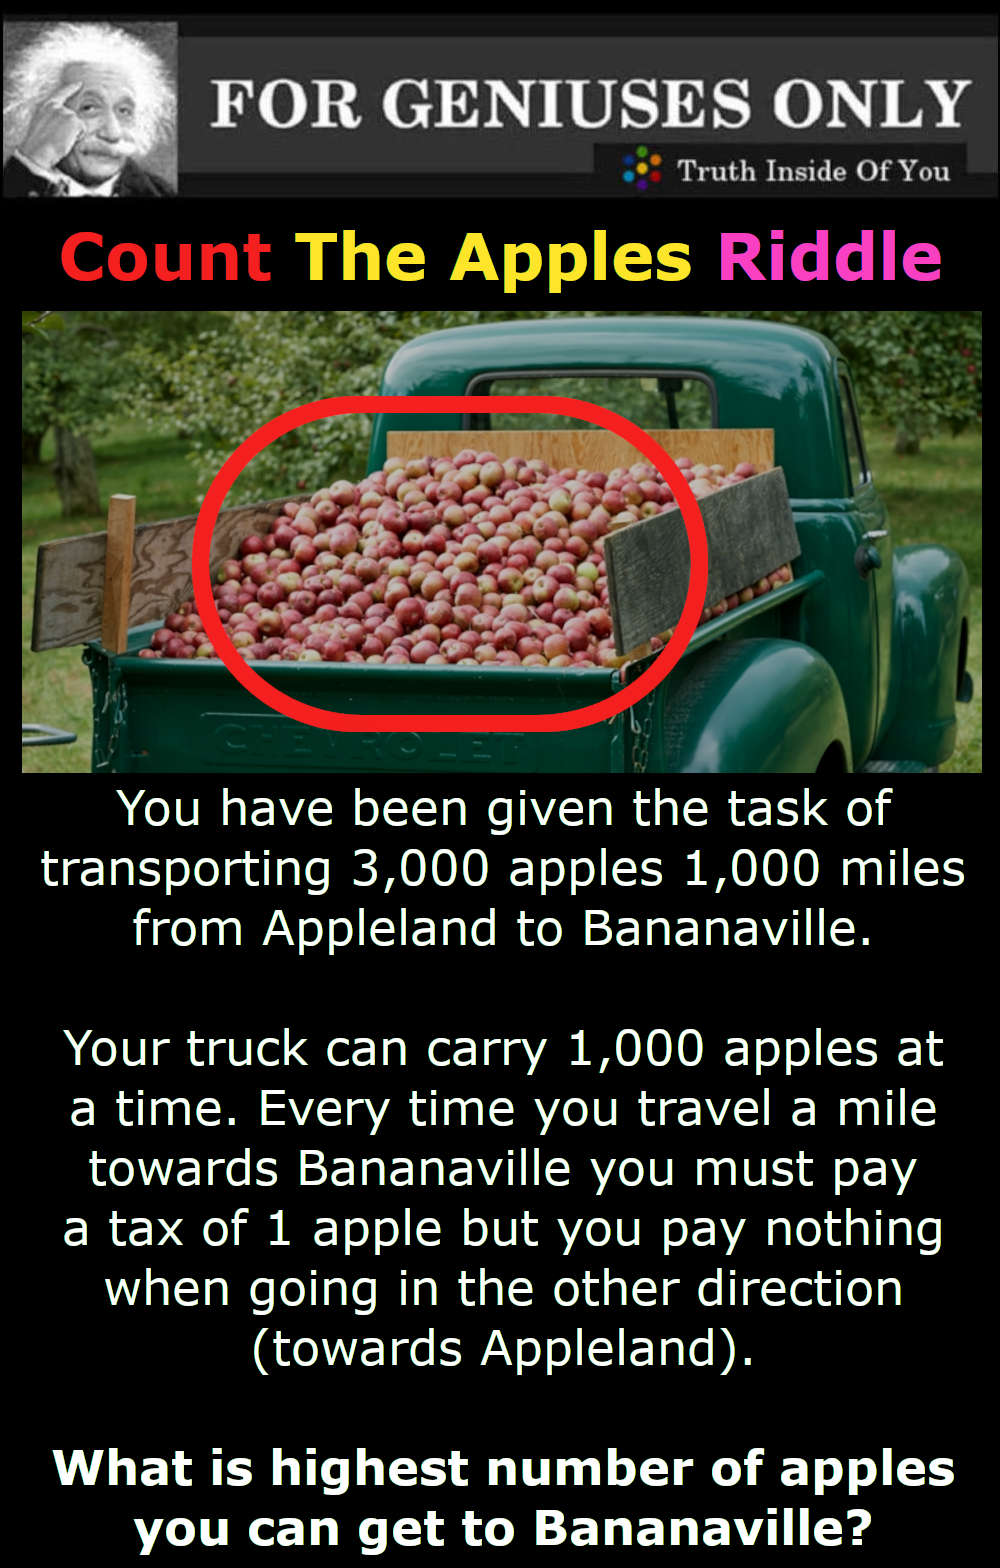 Count The Apples Riddle